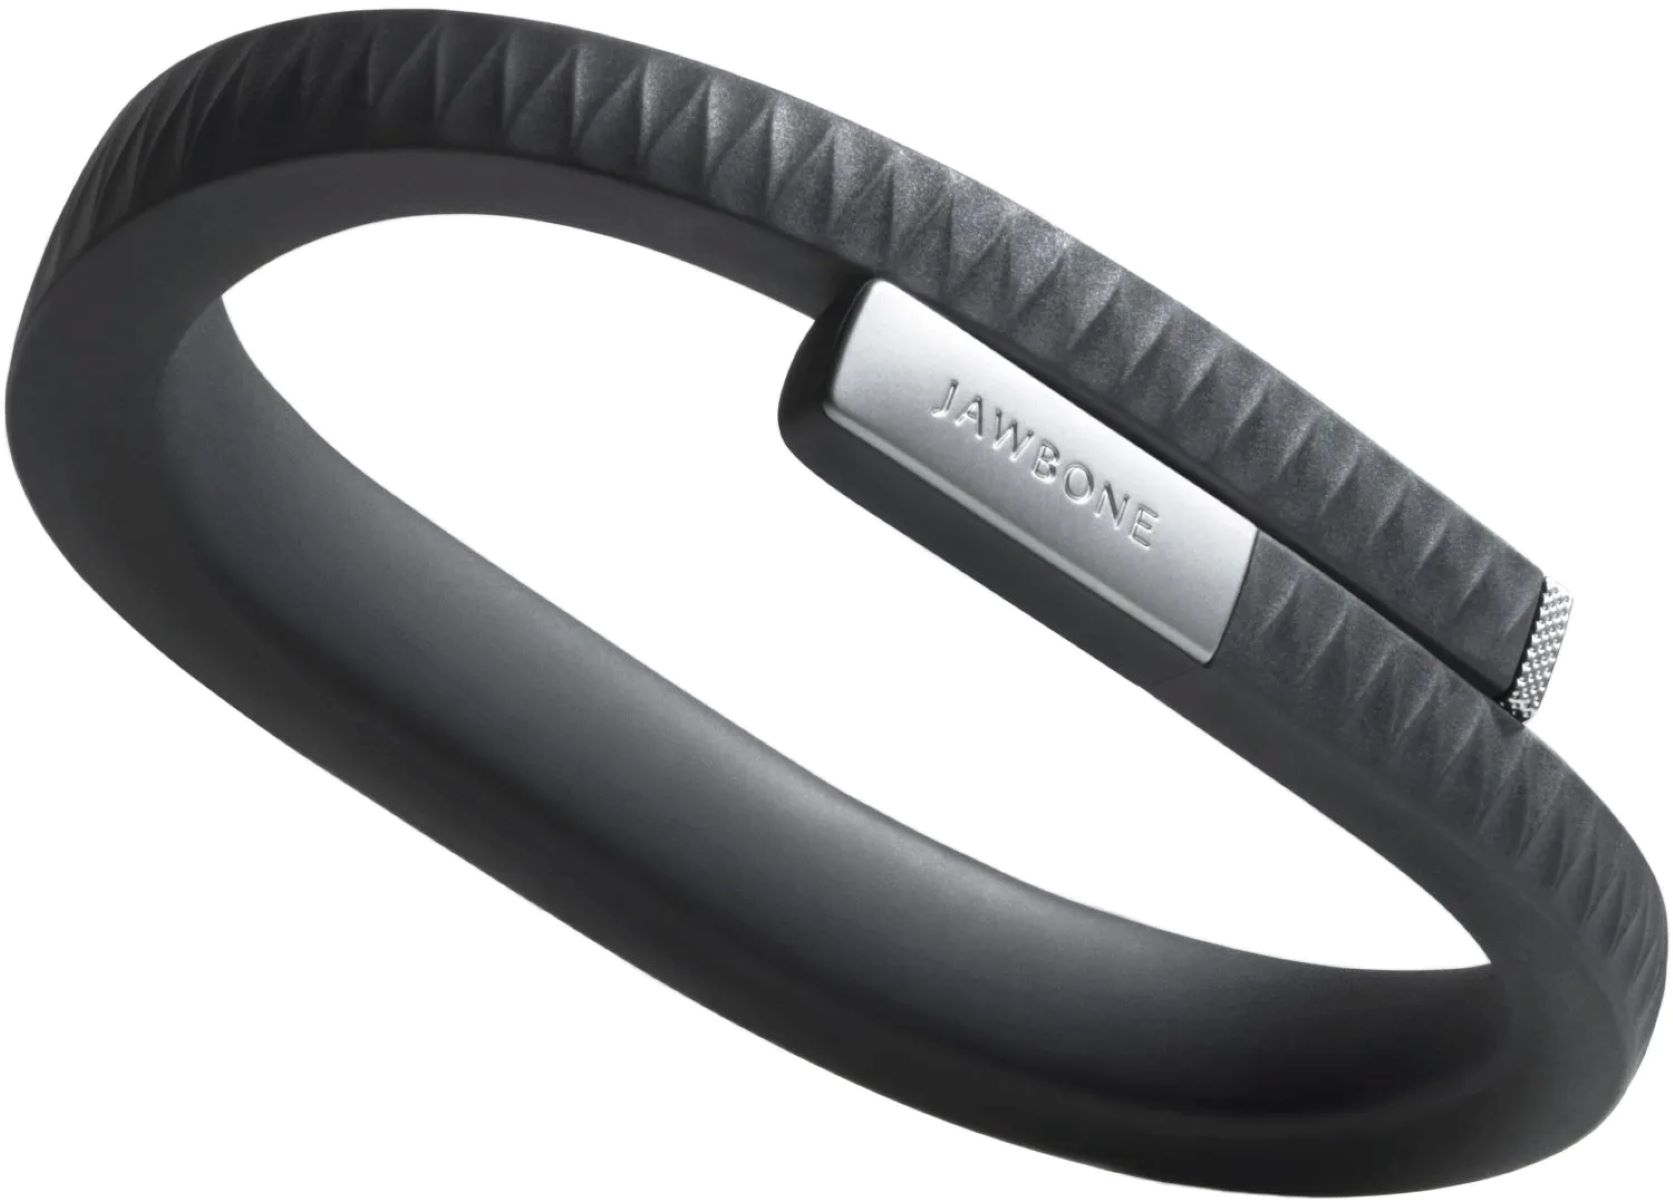 What Is Jawbone Fitness Tracker